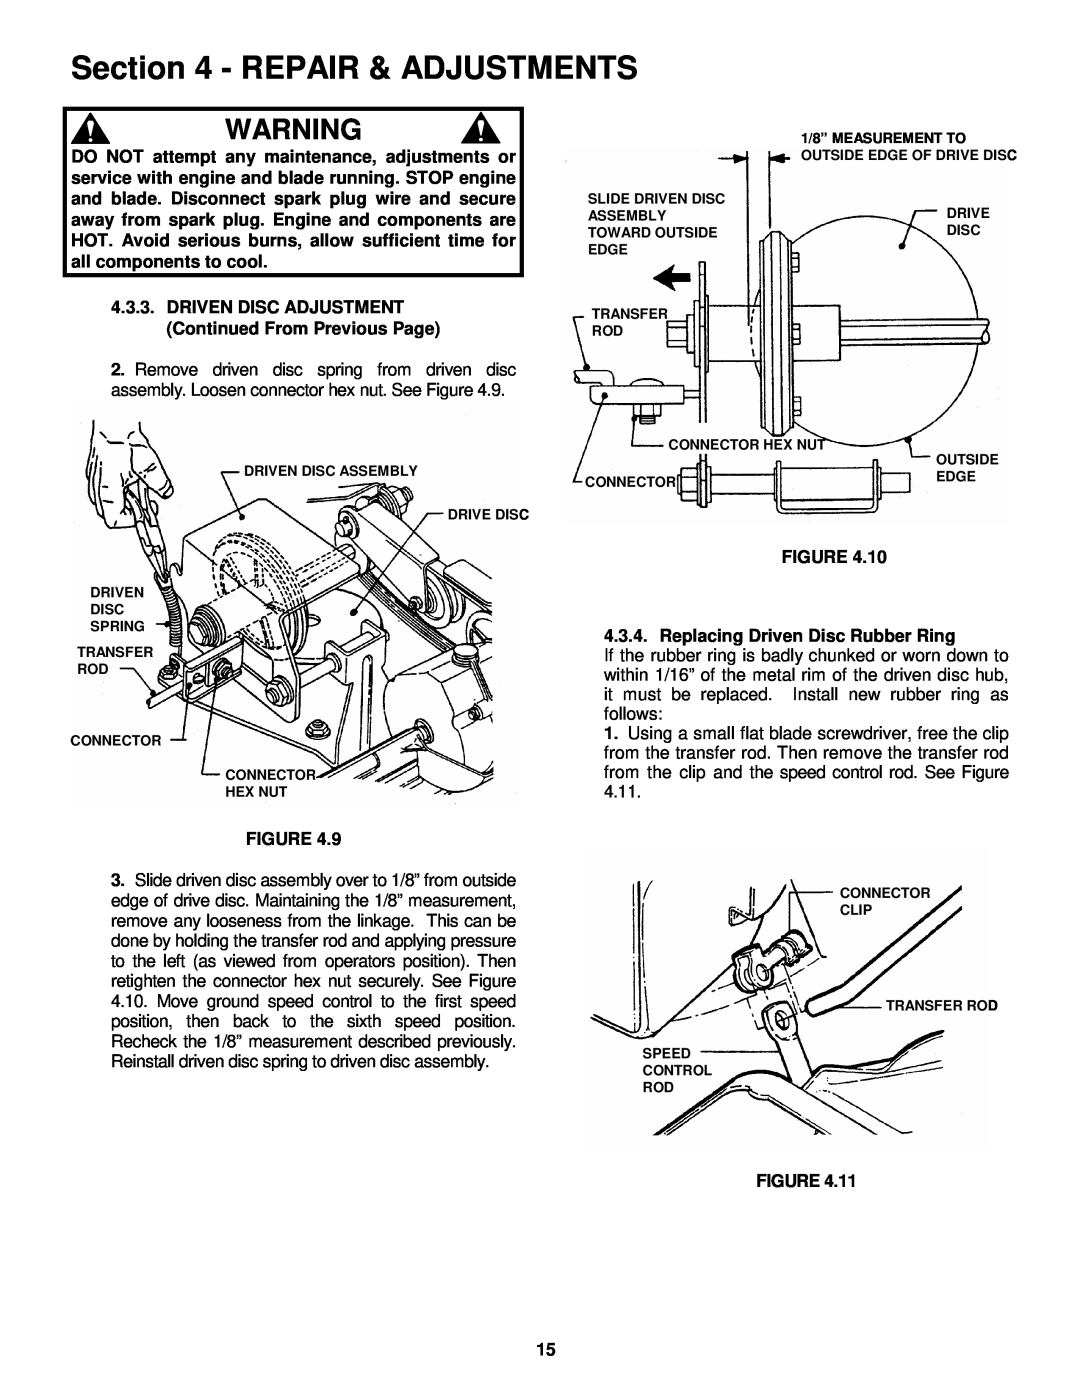 Snapper P216012E important safety instructions Repair & Adjustments, 3.4. Replacing Driven Disc Rubber Ring 